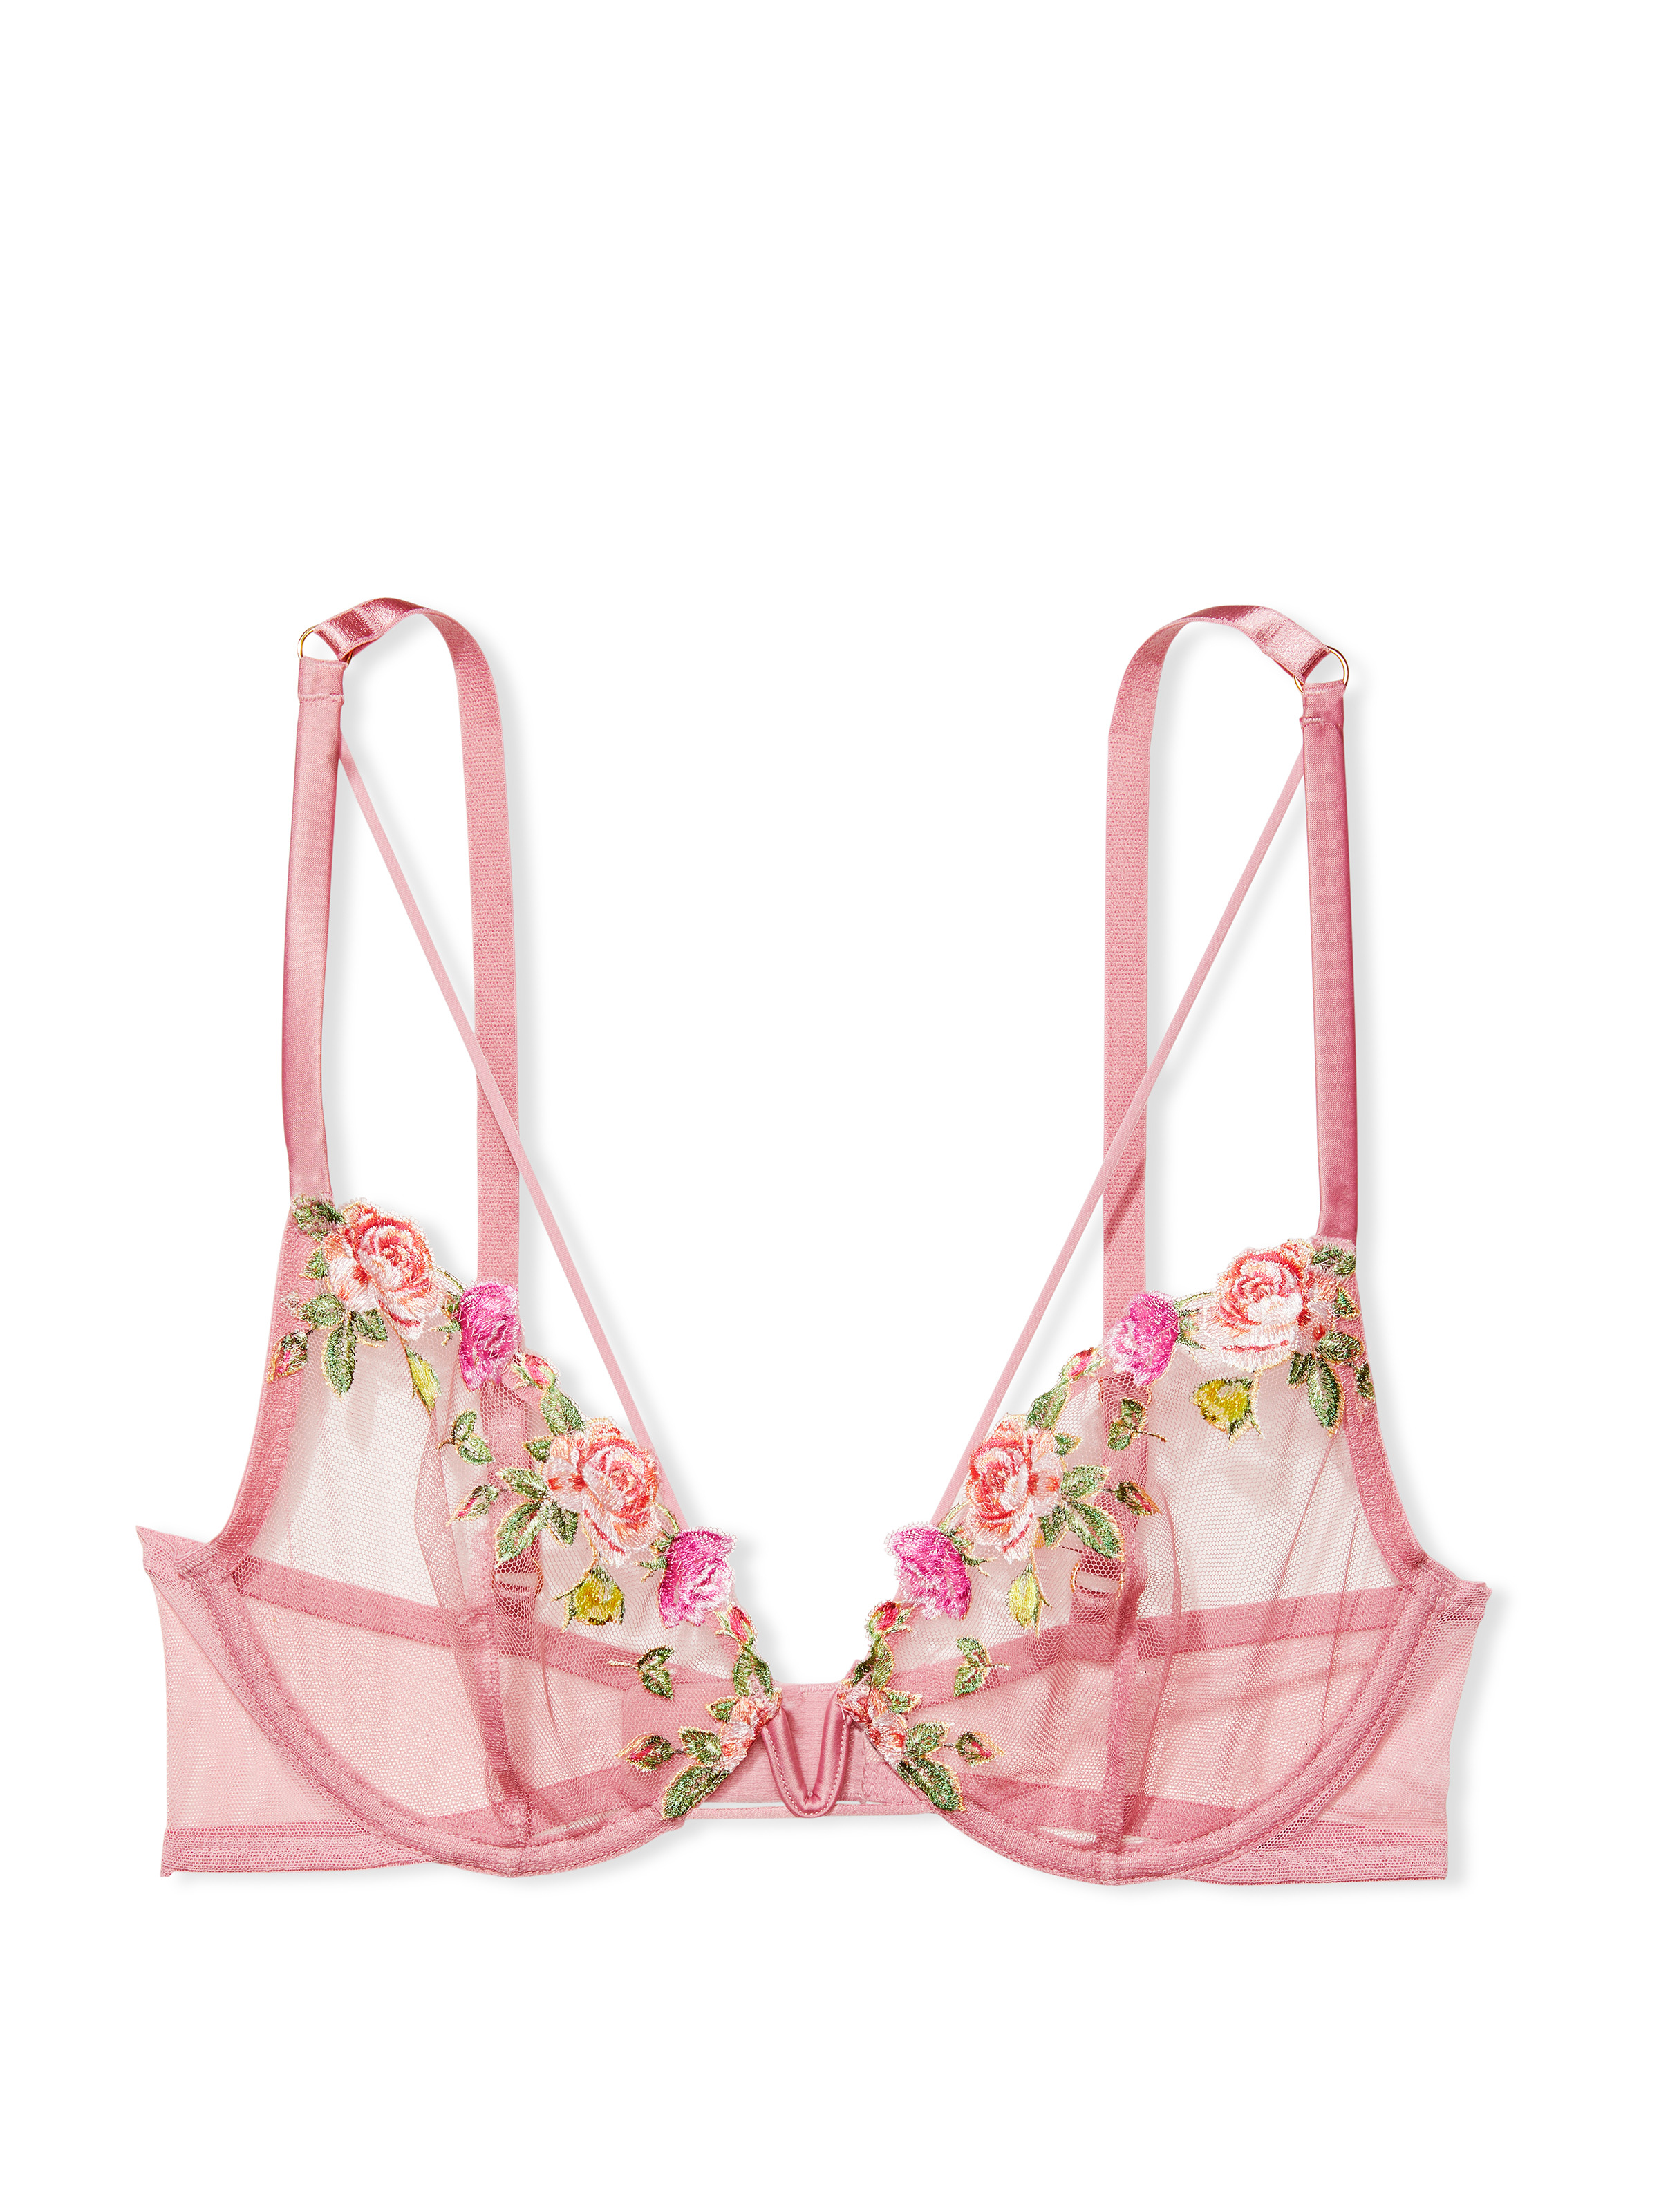 Victoria's Secret Luxe Very Sexy Unlined Rose Embroidered Demi Bra